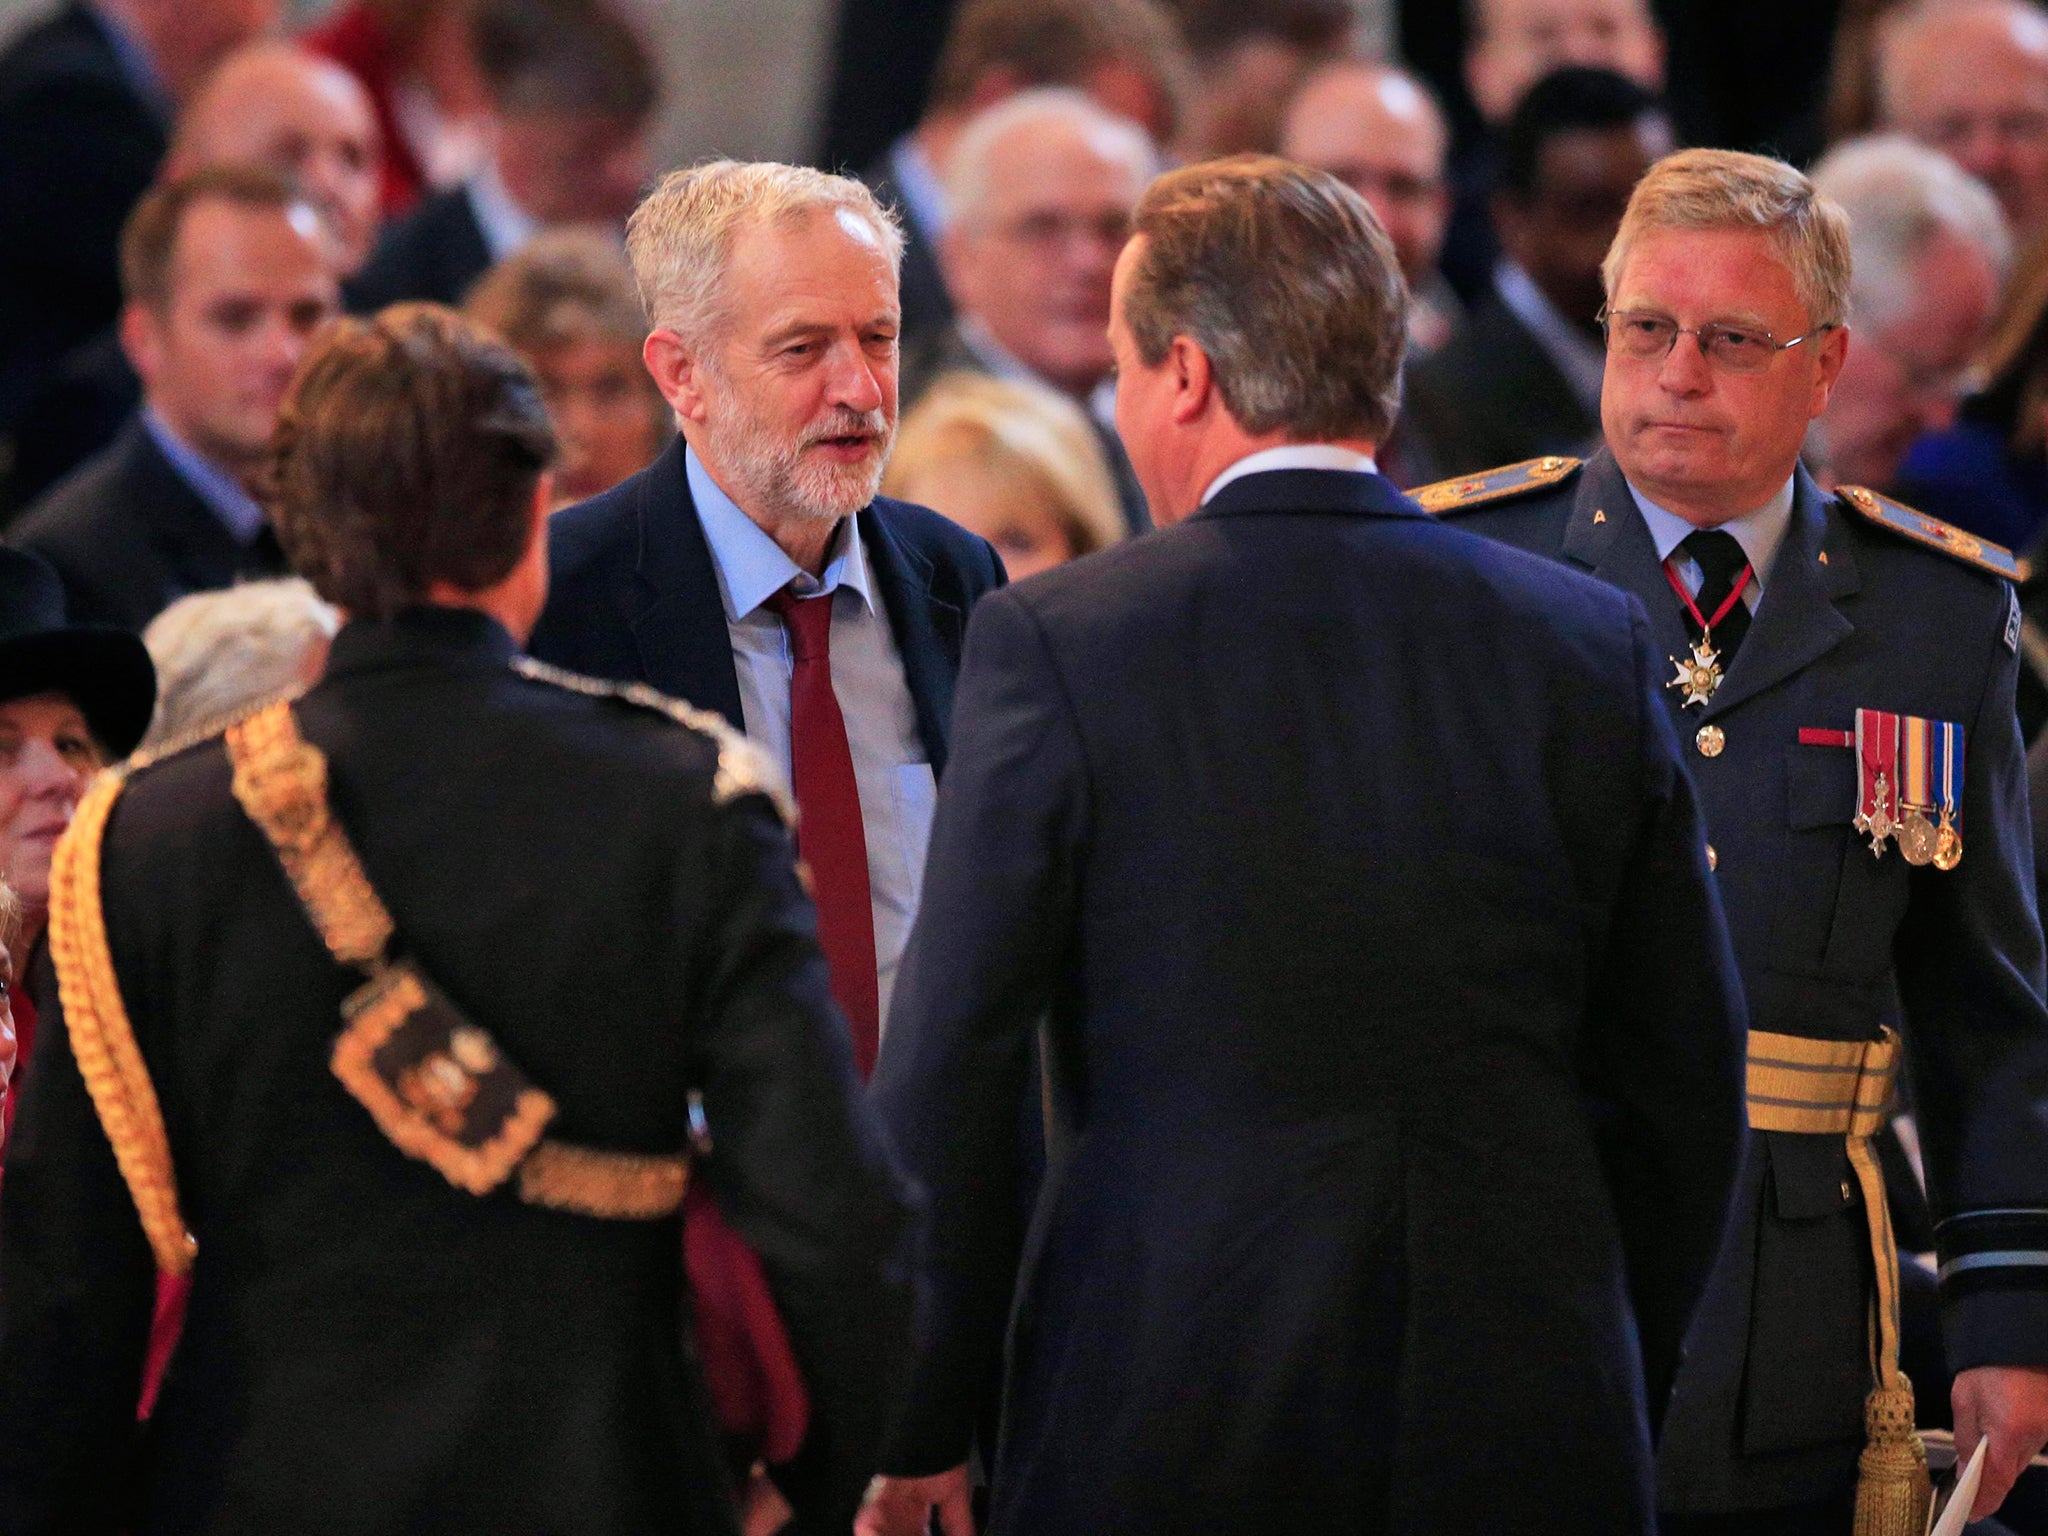 Jeremy Corbyn's decision to remain silent during the national anthem at the Battle of Britain service will be retested on Remembrance Day